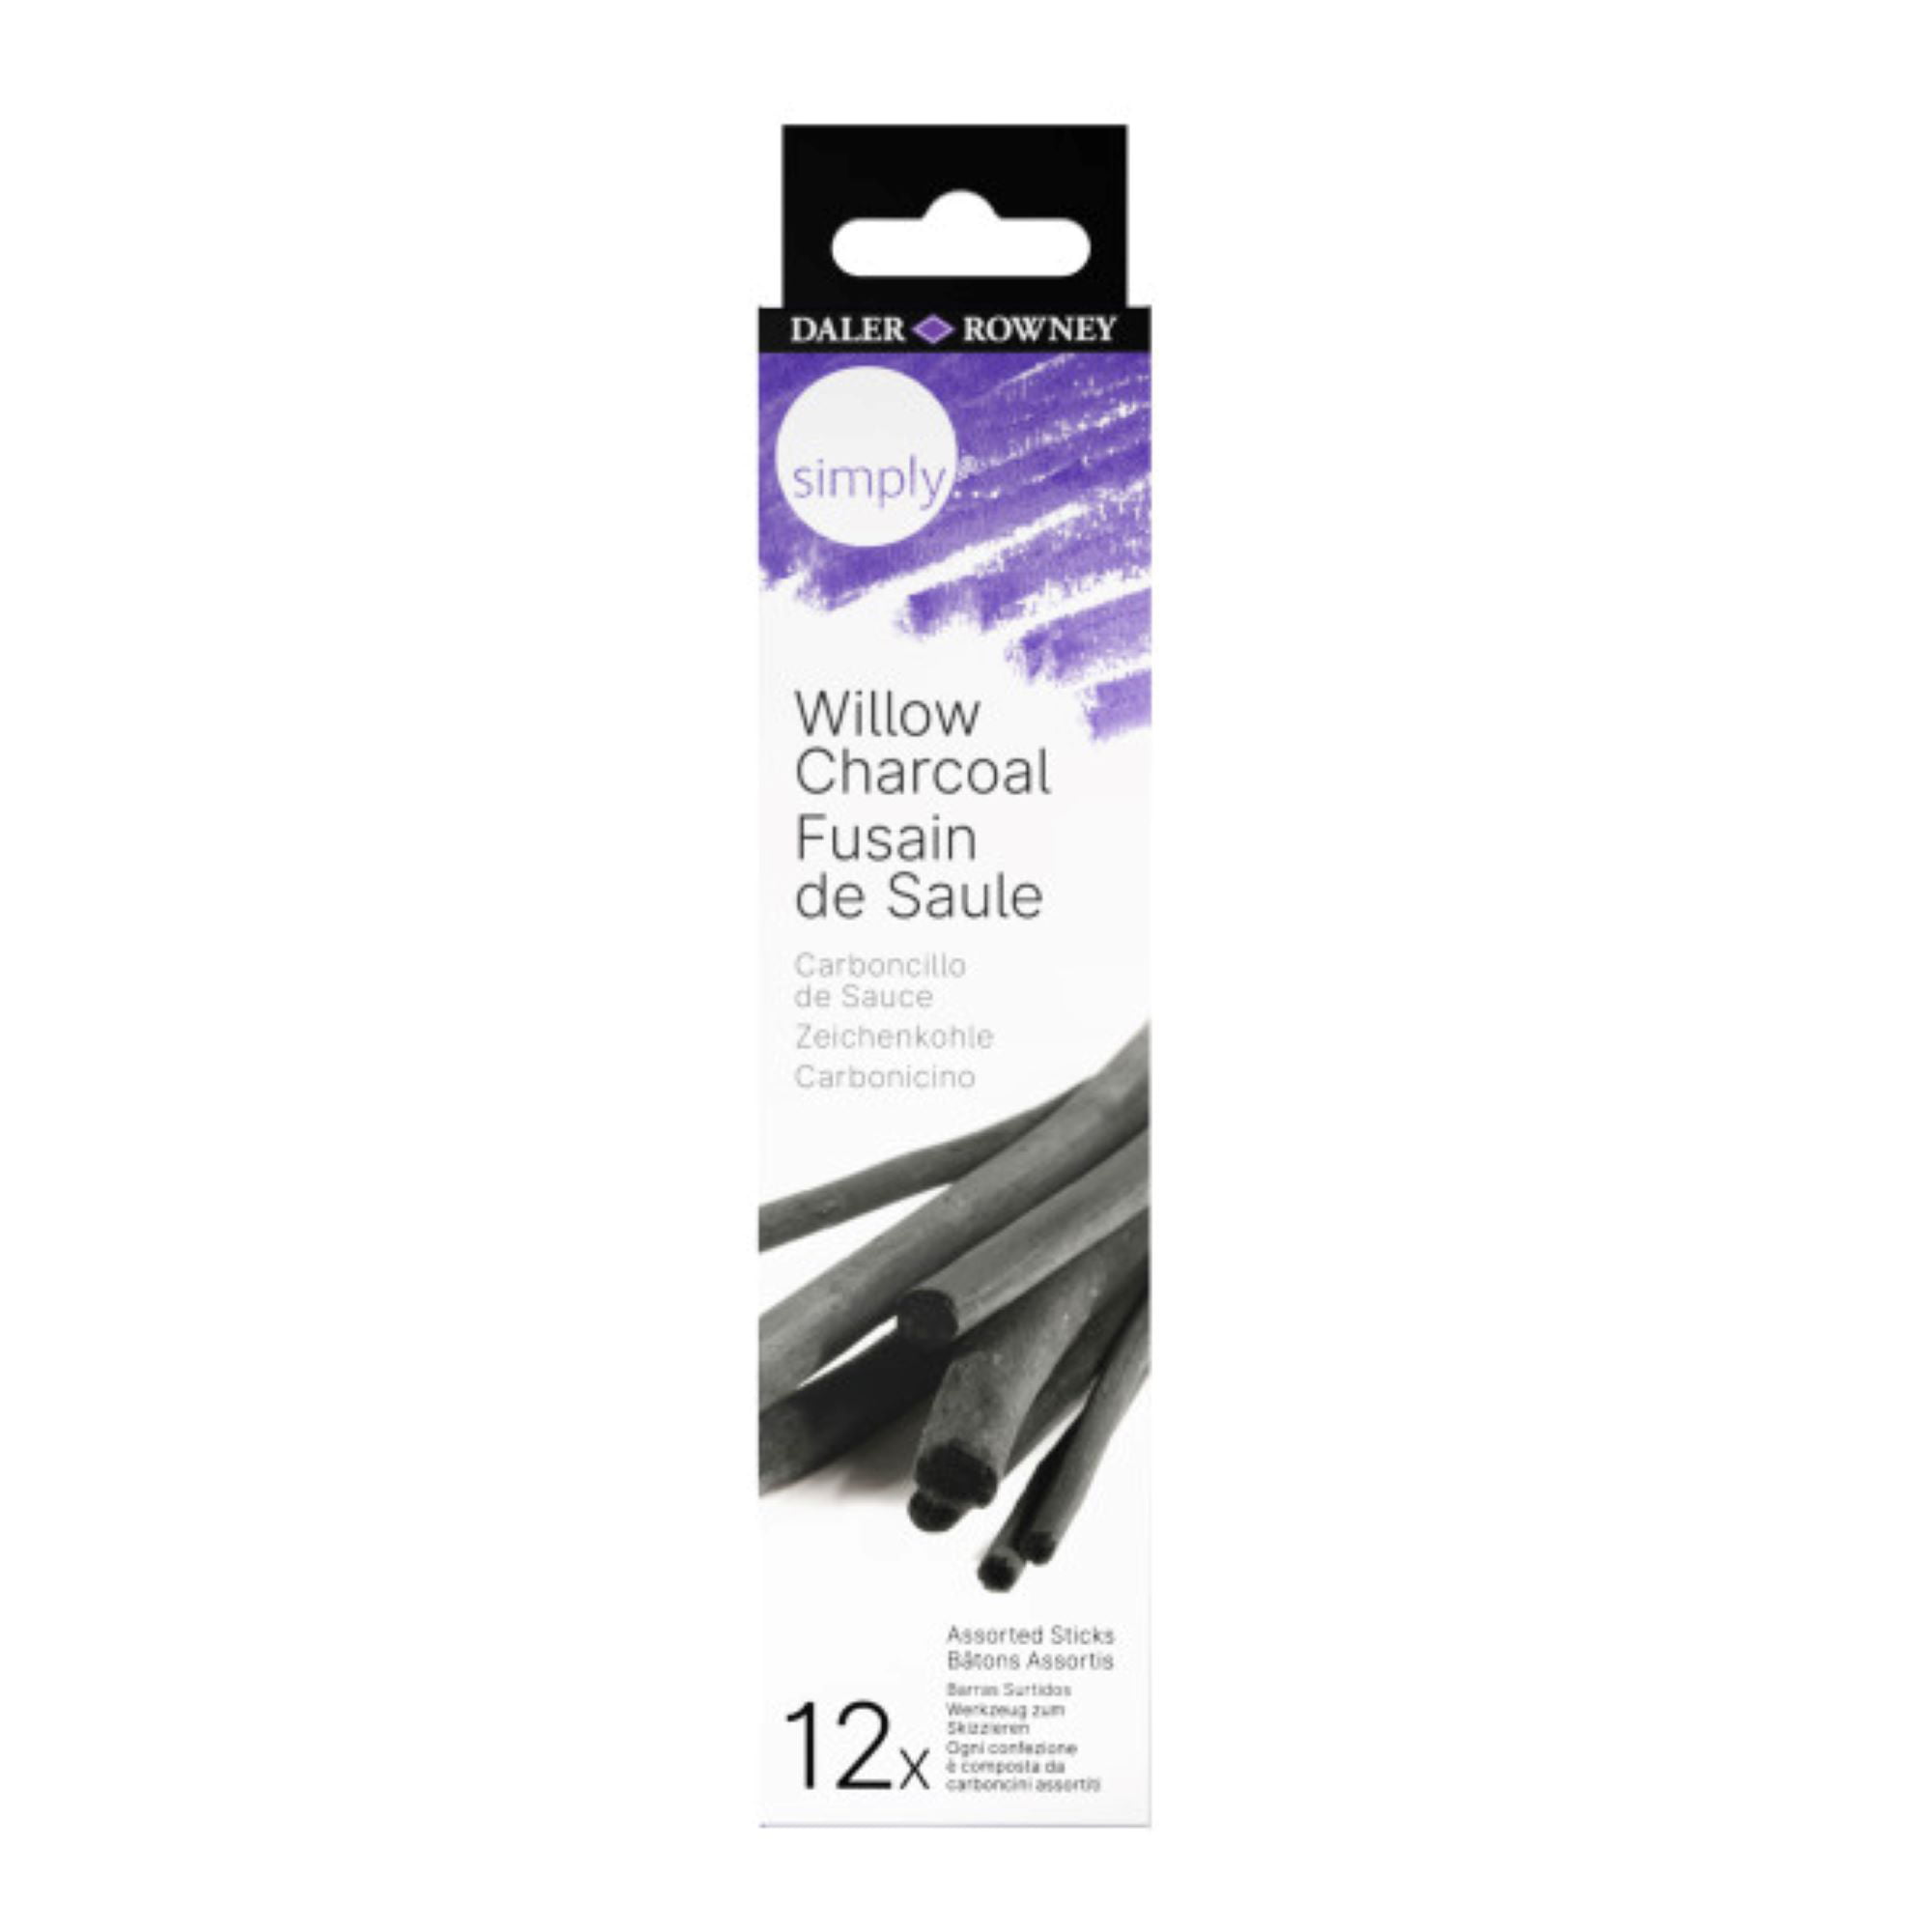 Daler-Rowney Simply Willow Charcoal Set, Black, 12 Piece